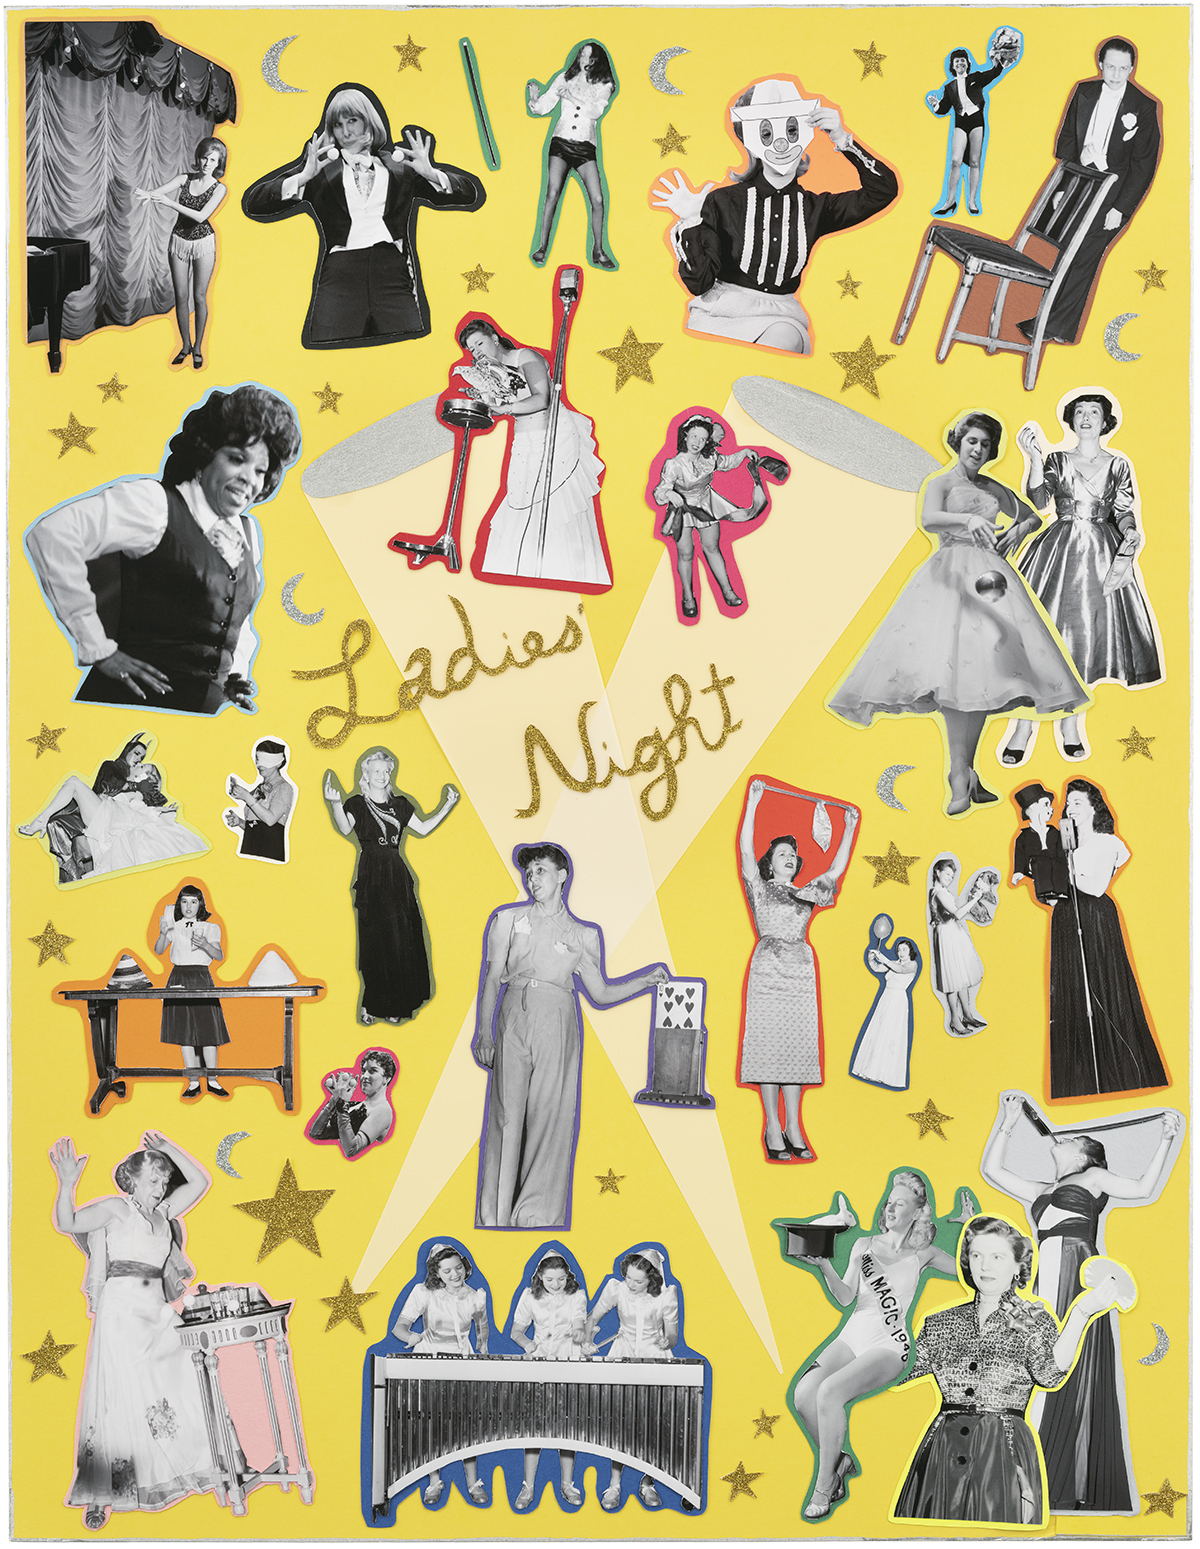 Collage of photographs of women performers on a yellow background.